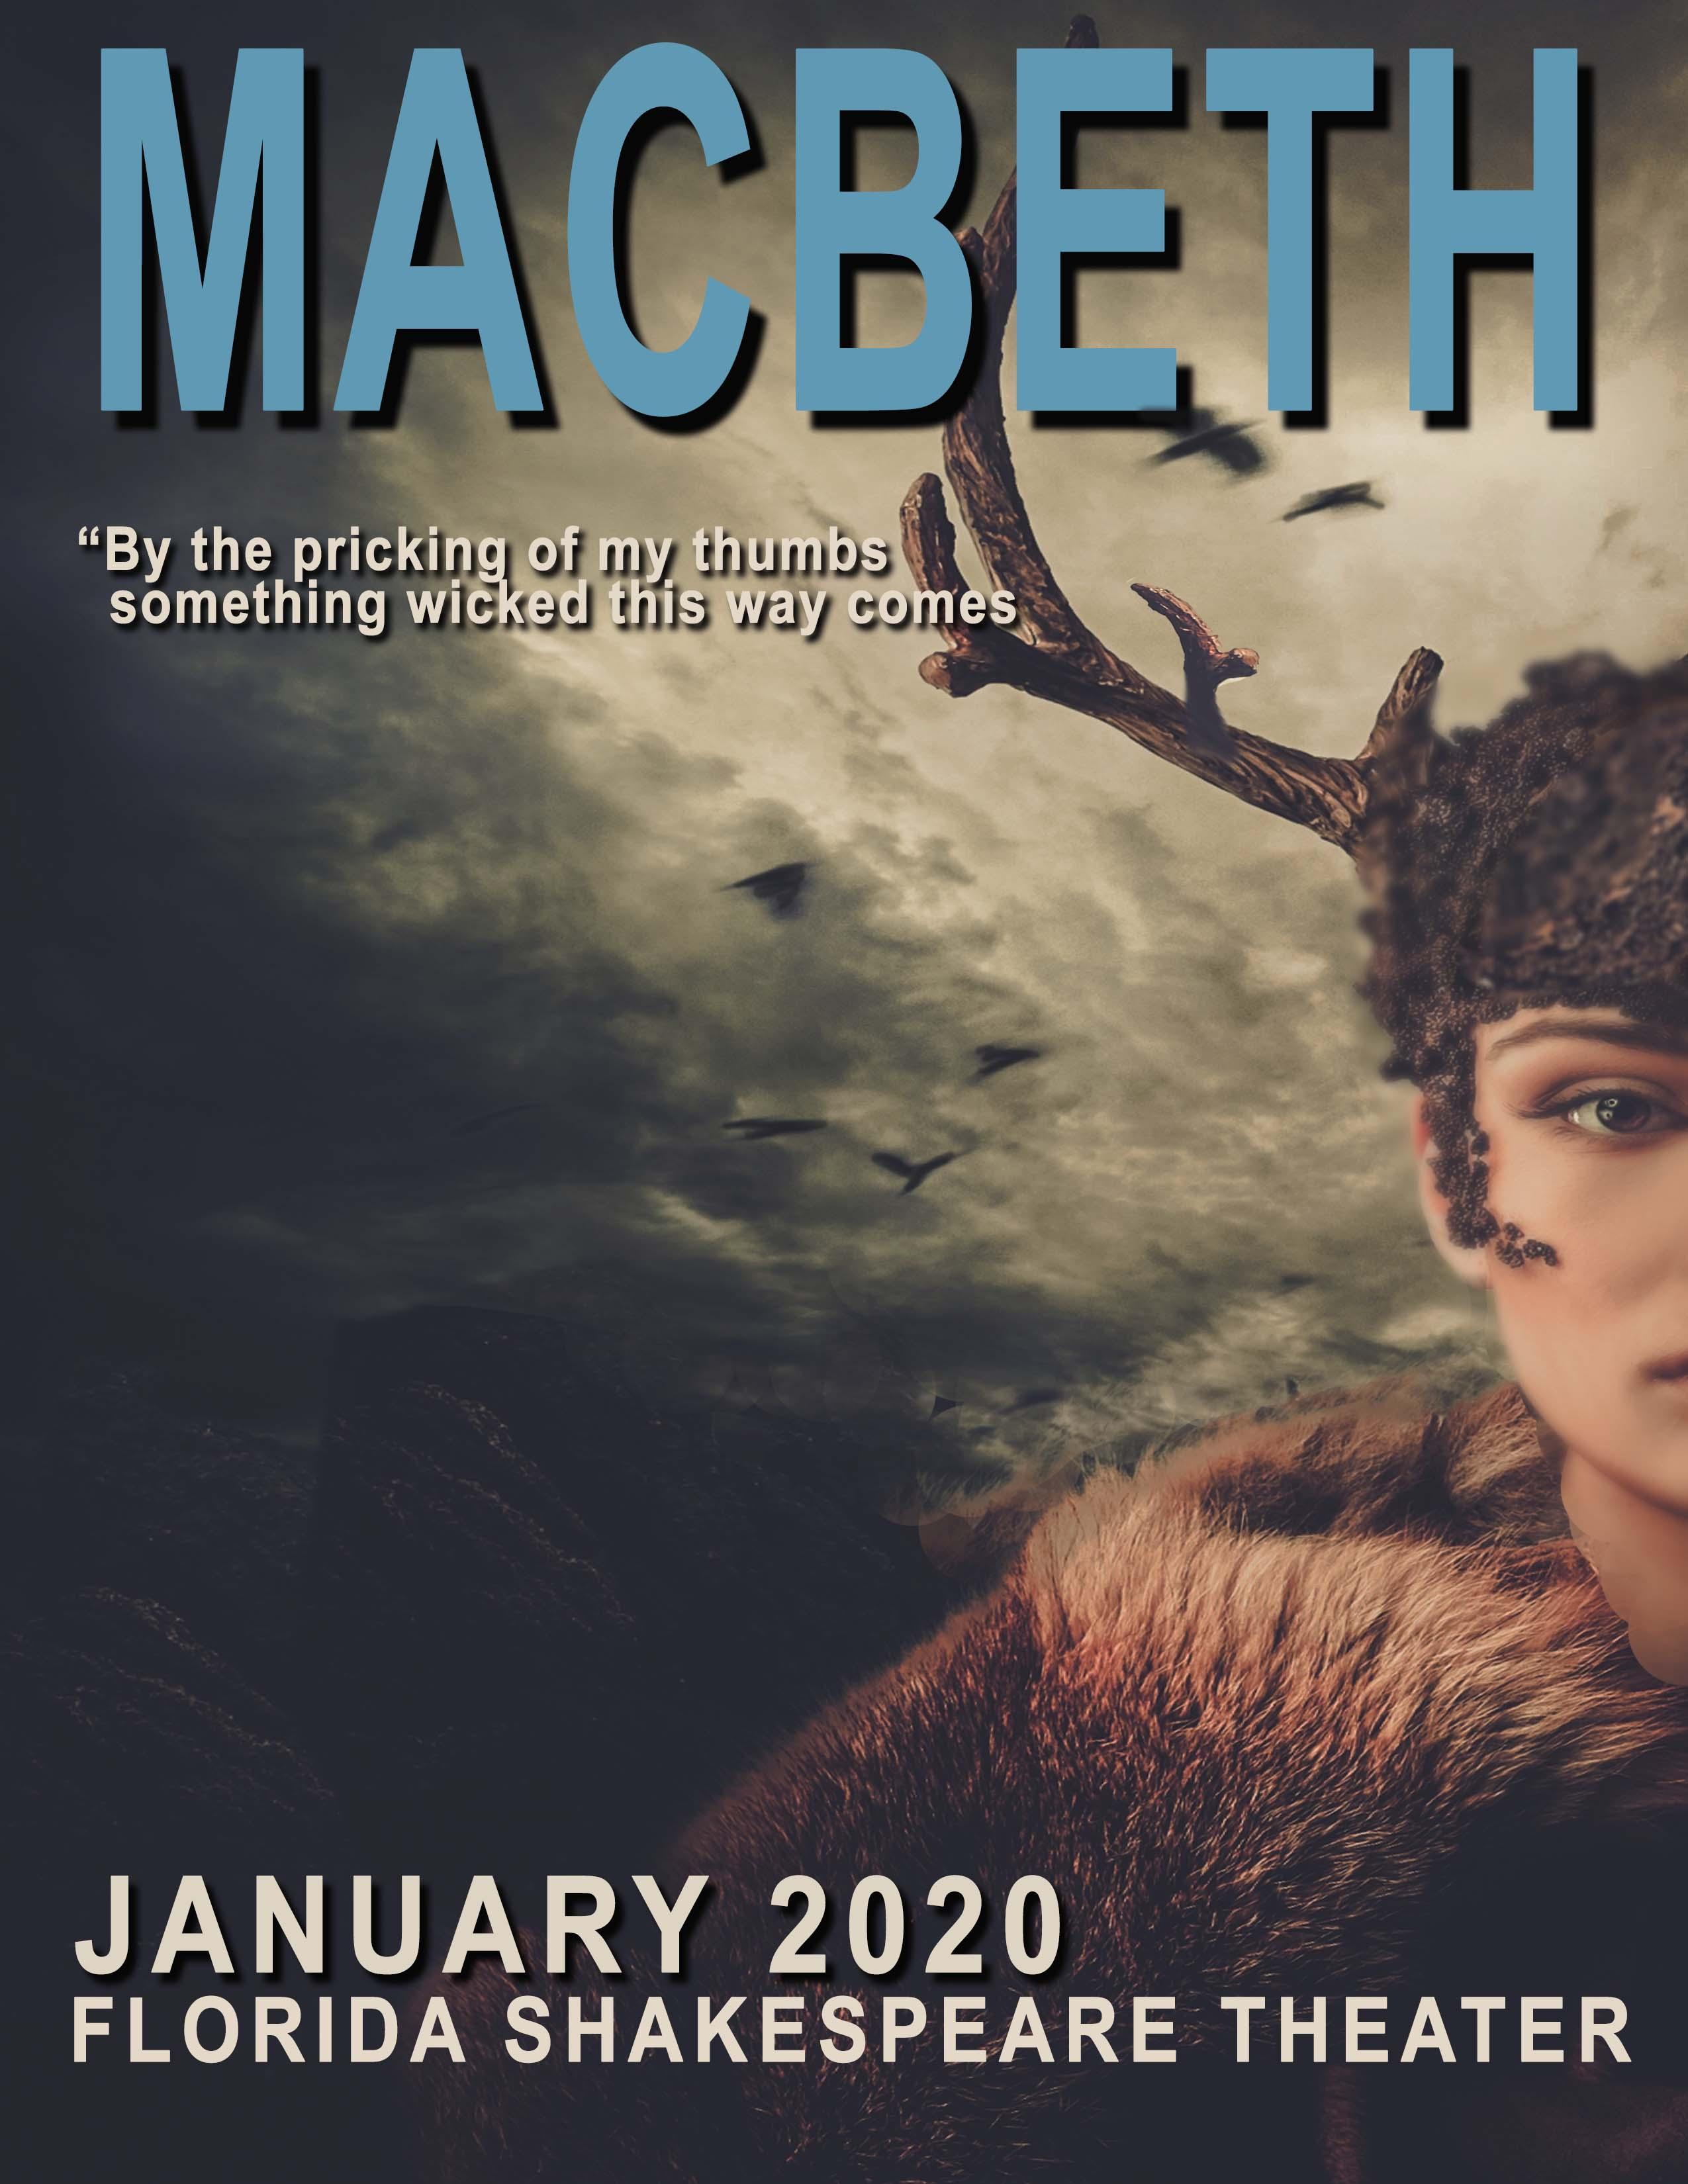 Macbeth - Free Shakespeare in the Park - Pinecrest